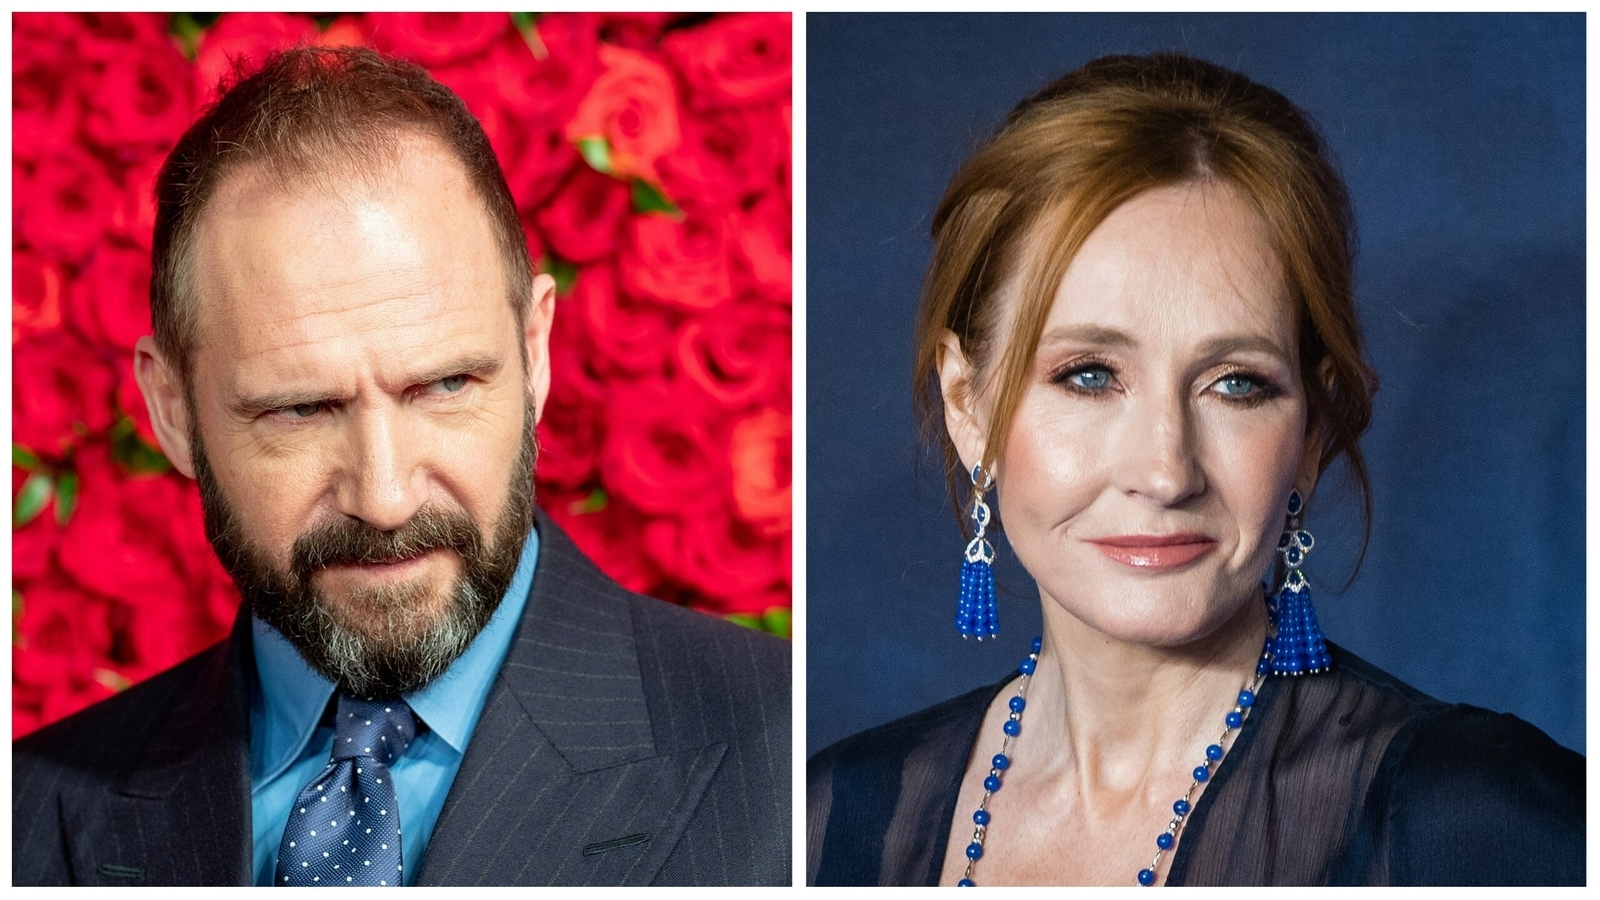 Harry Potter’s Voldemort Ralph Fiennes defends JK Rowling’s stance on trans people: I understand where she’s coming from